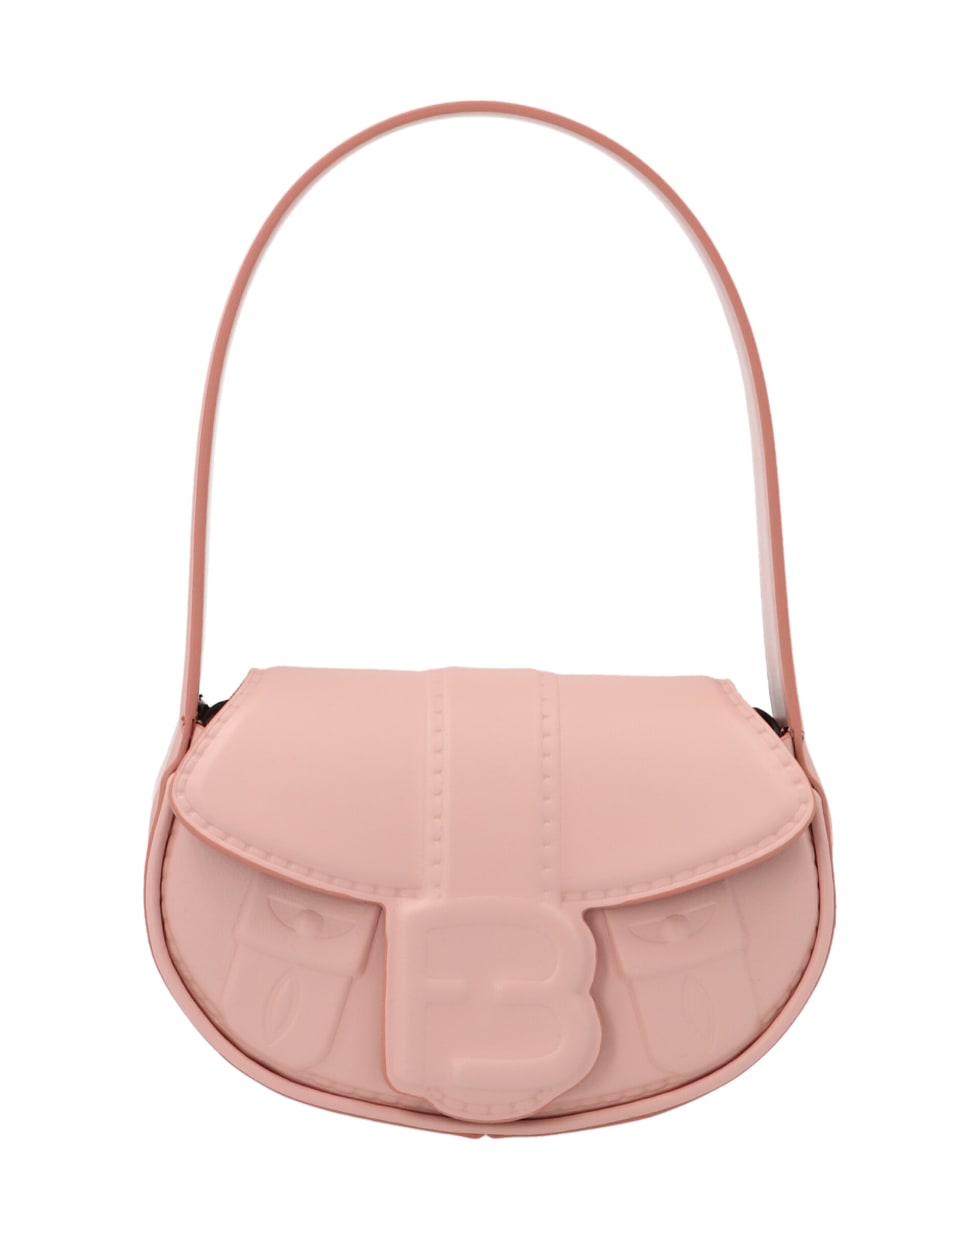 Forbitches 'my Boo 6' Bag - Pink